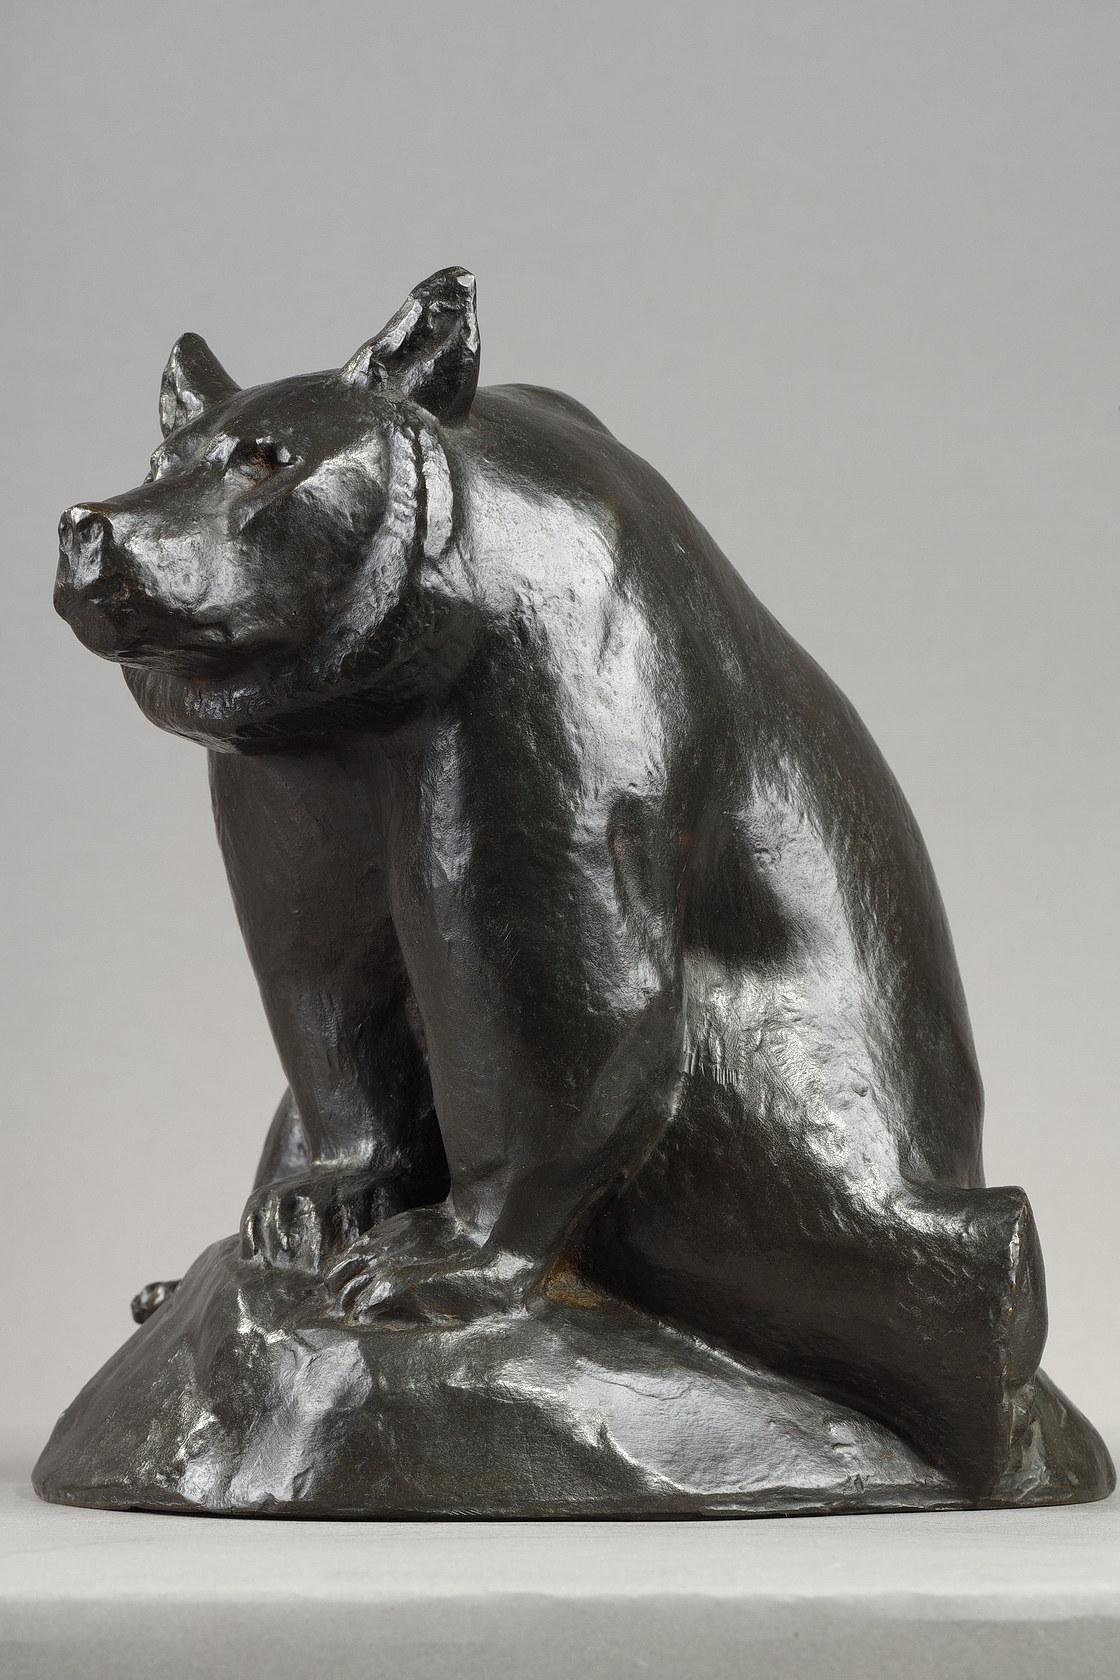 Pyrenean bear sitting
by Georges GUYOT (1885-1972)

Sculpture in bronze with a nuanced black patina
Signed 